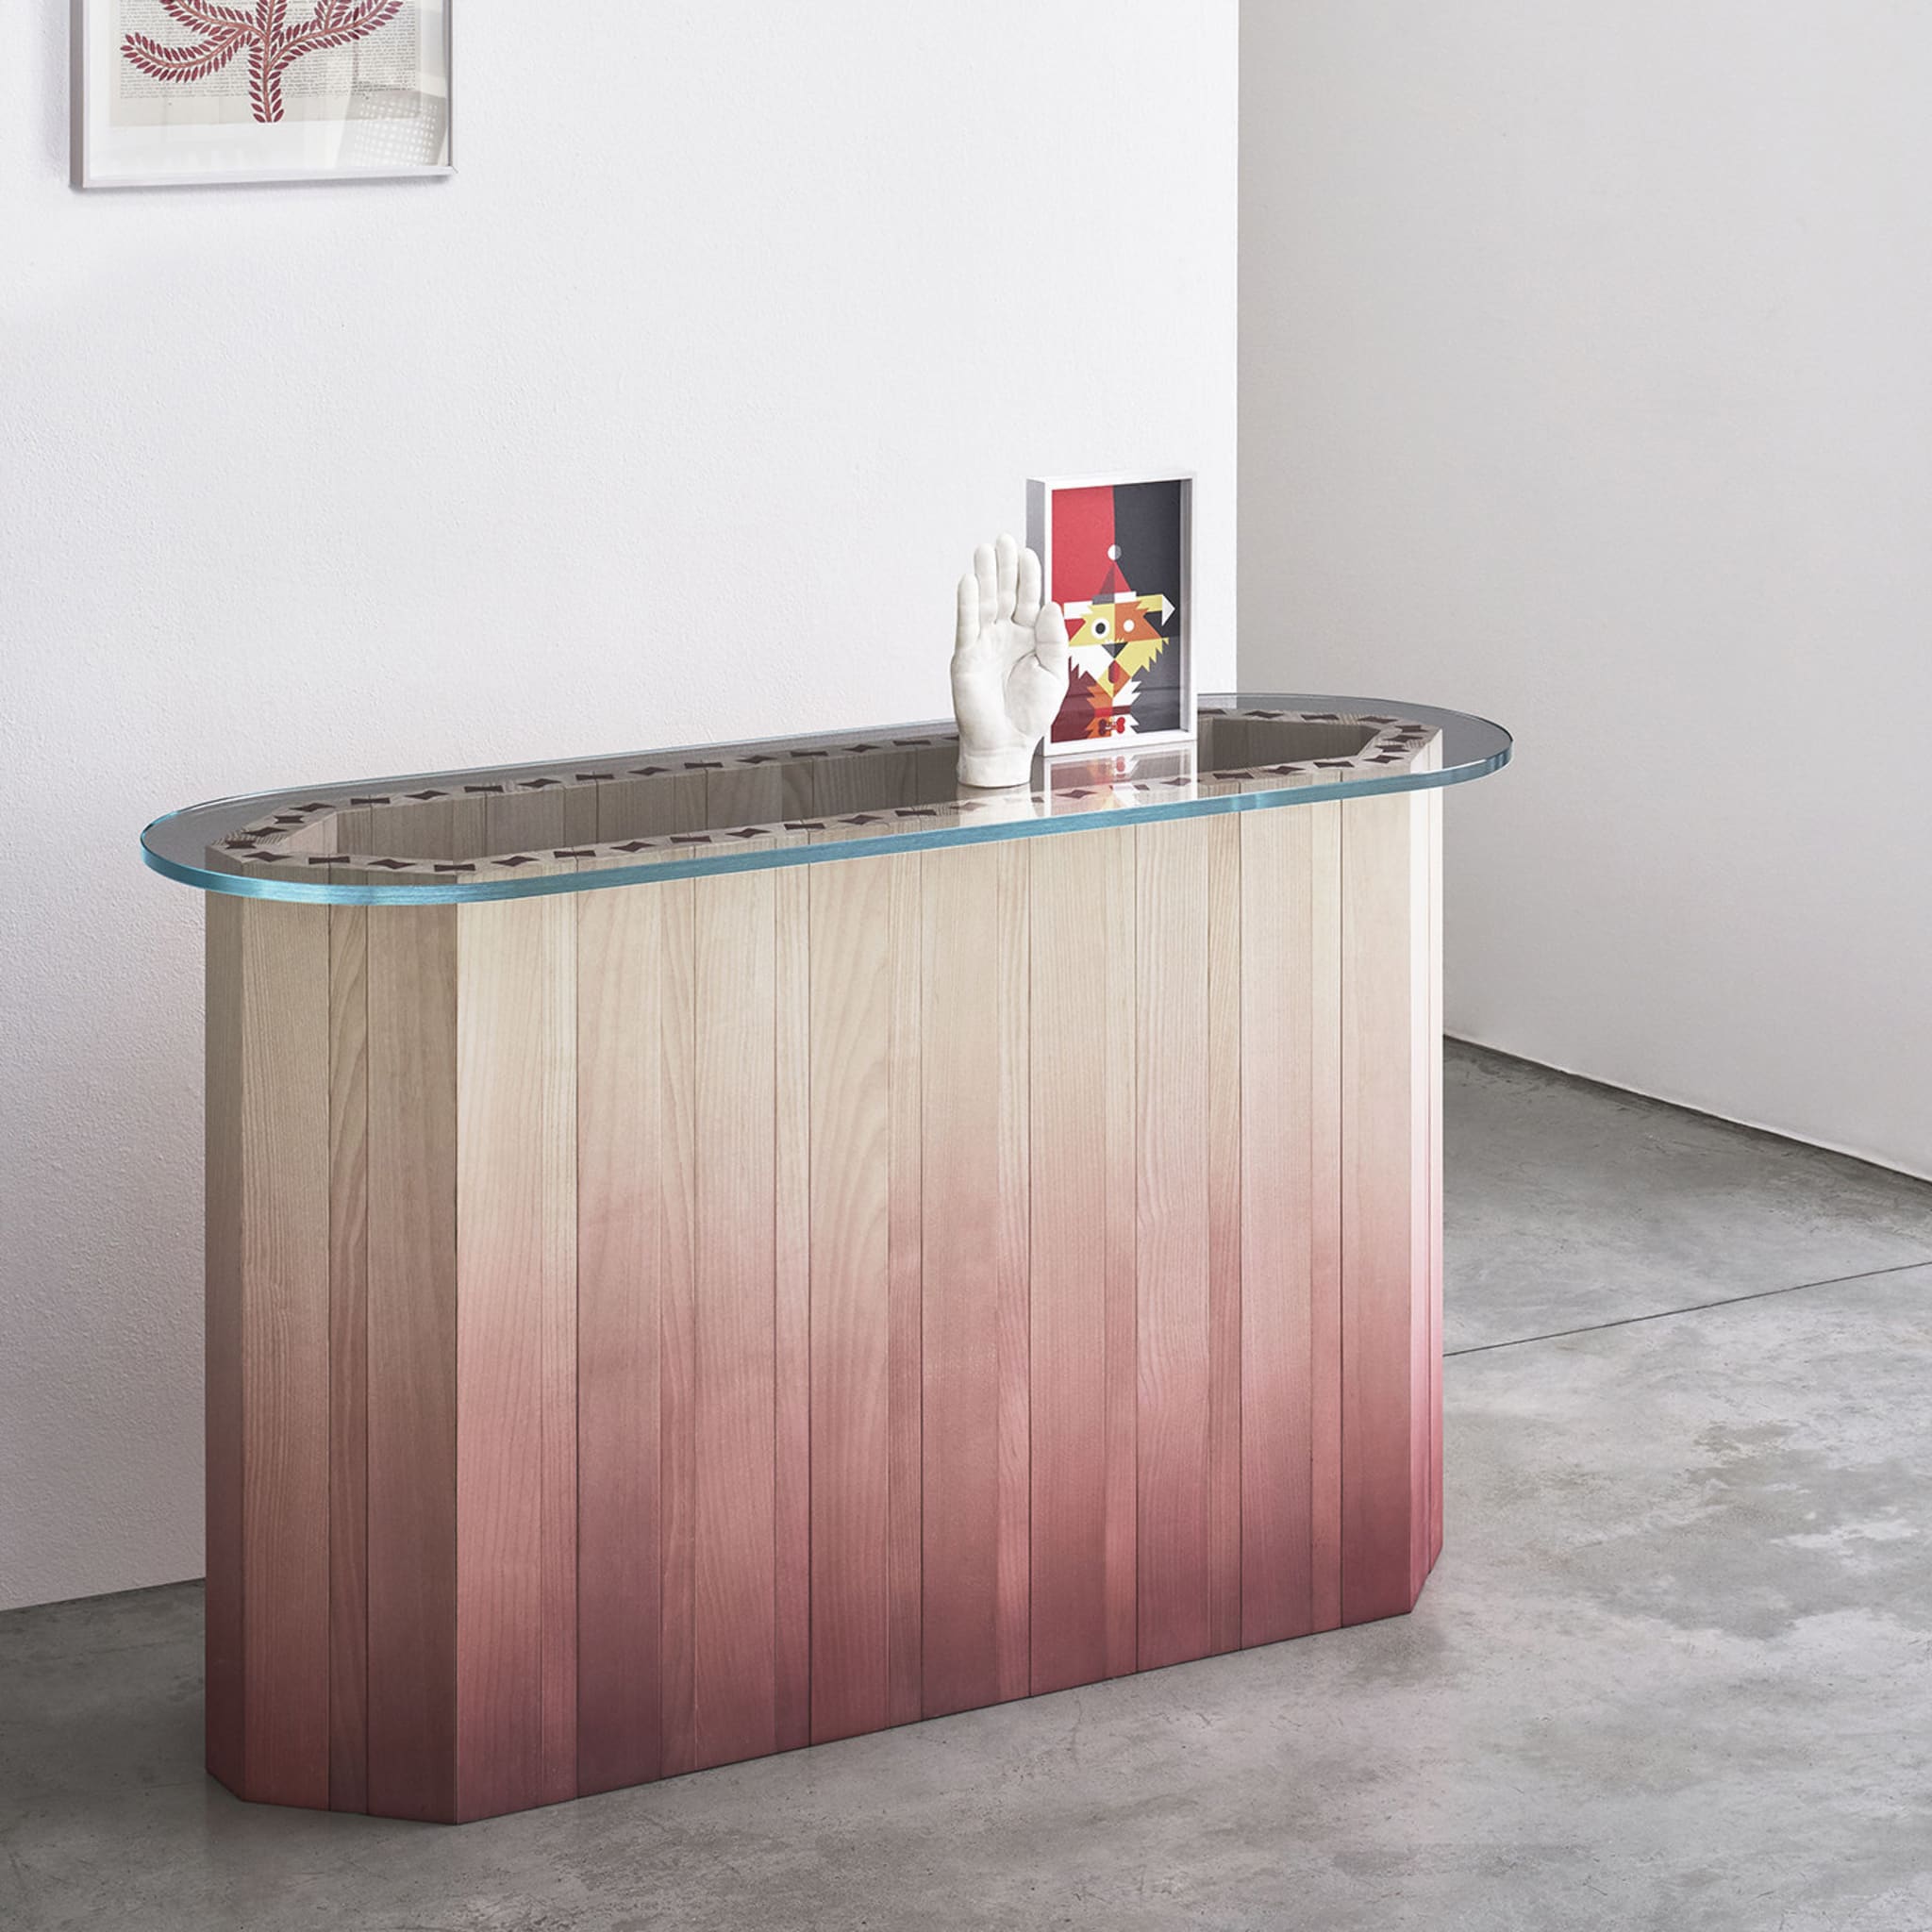 Swallow Console Table by Francesco Citterio - Alternative view 5